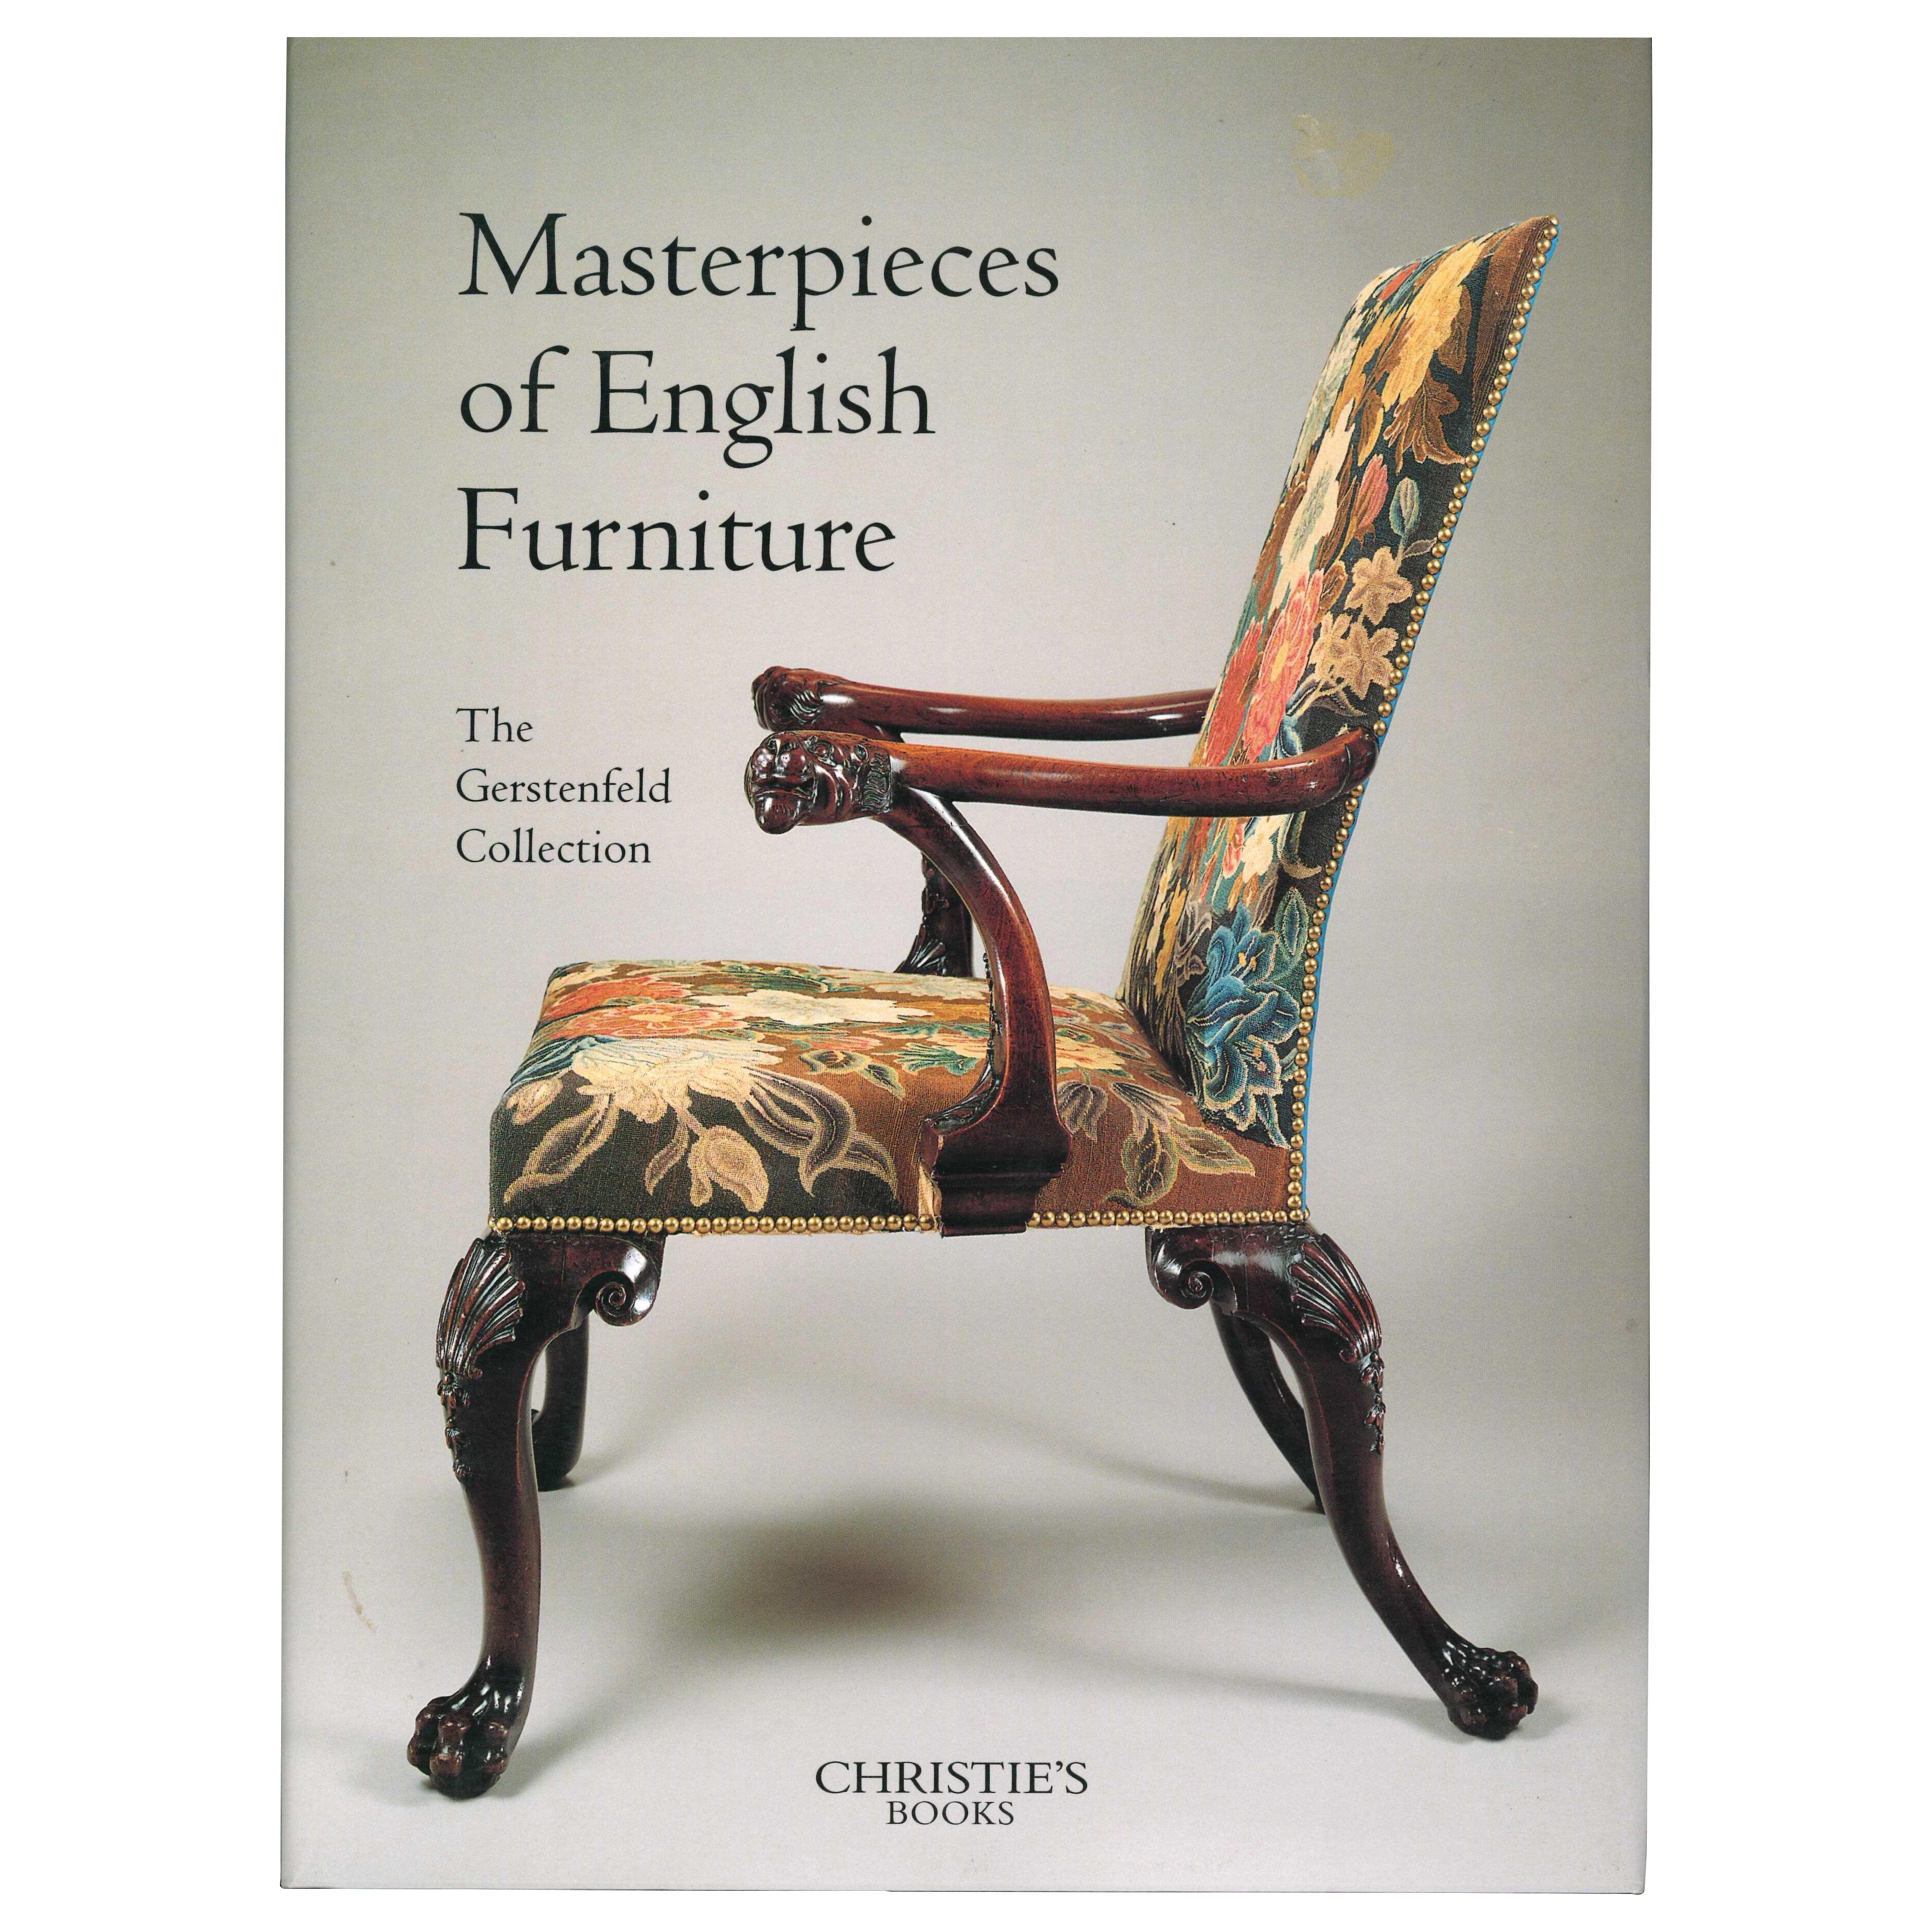 MASTERPIECES OF ENGLISH FURNITURE - The Gerstenfeld Collection. Book